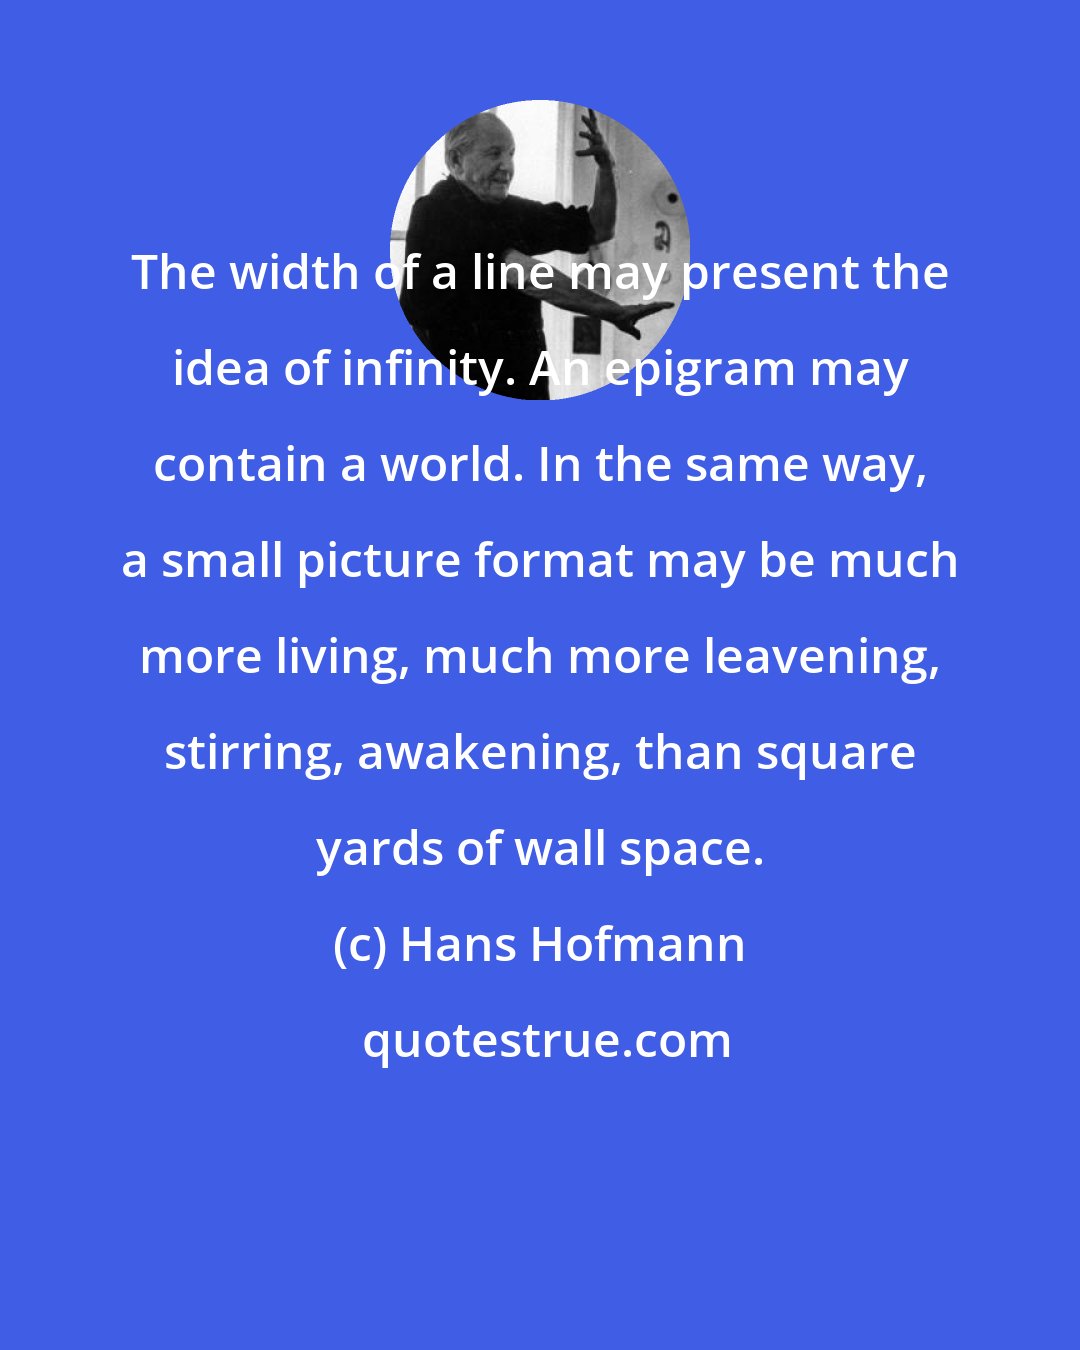 Hans Hofmann: The width of a line may present the idea of infinity. An epigram may contain a world. In the same way, a small picture format may be much more living, much more leavening, stirring, awakening, than square yards of wall space.